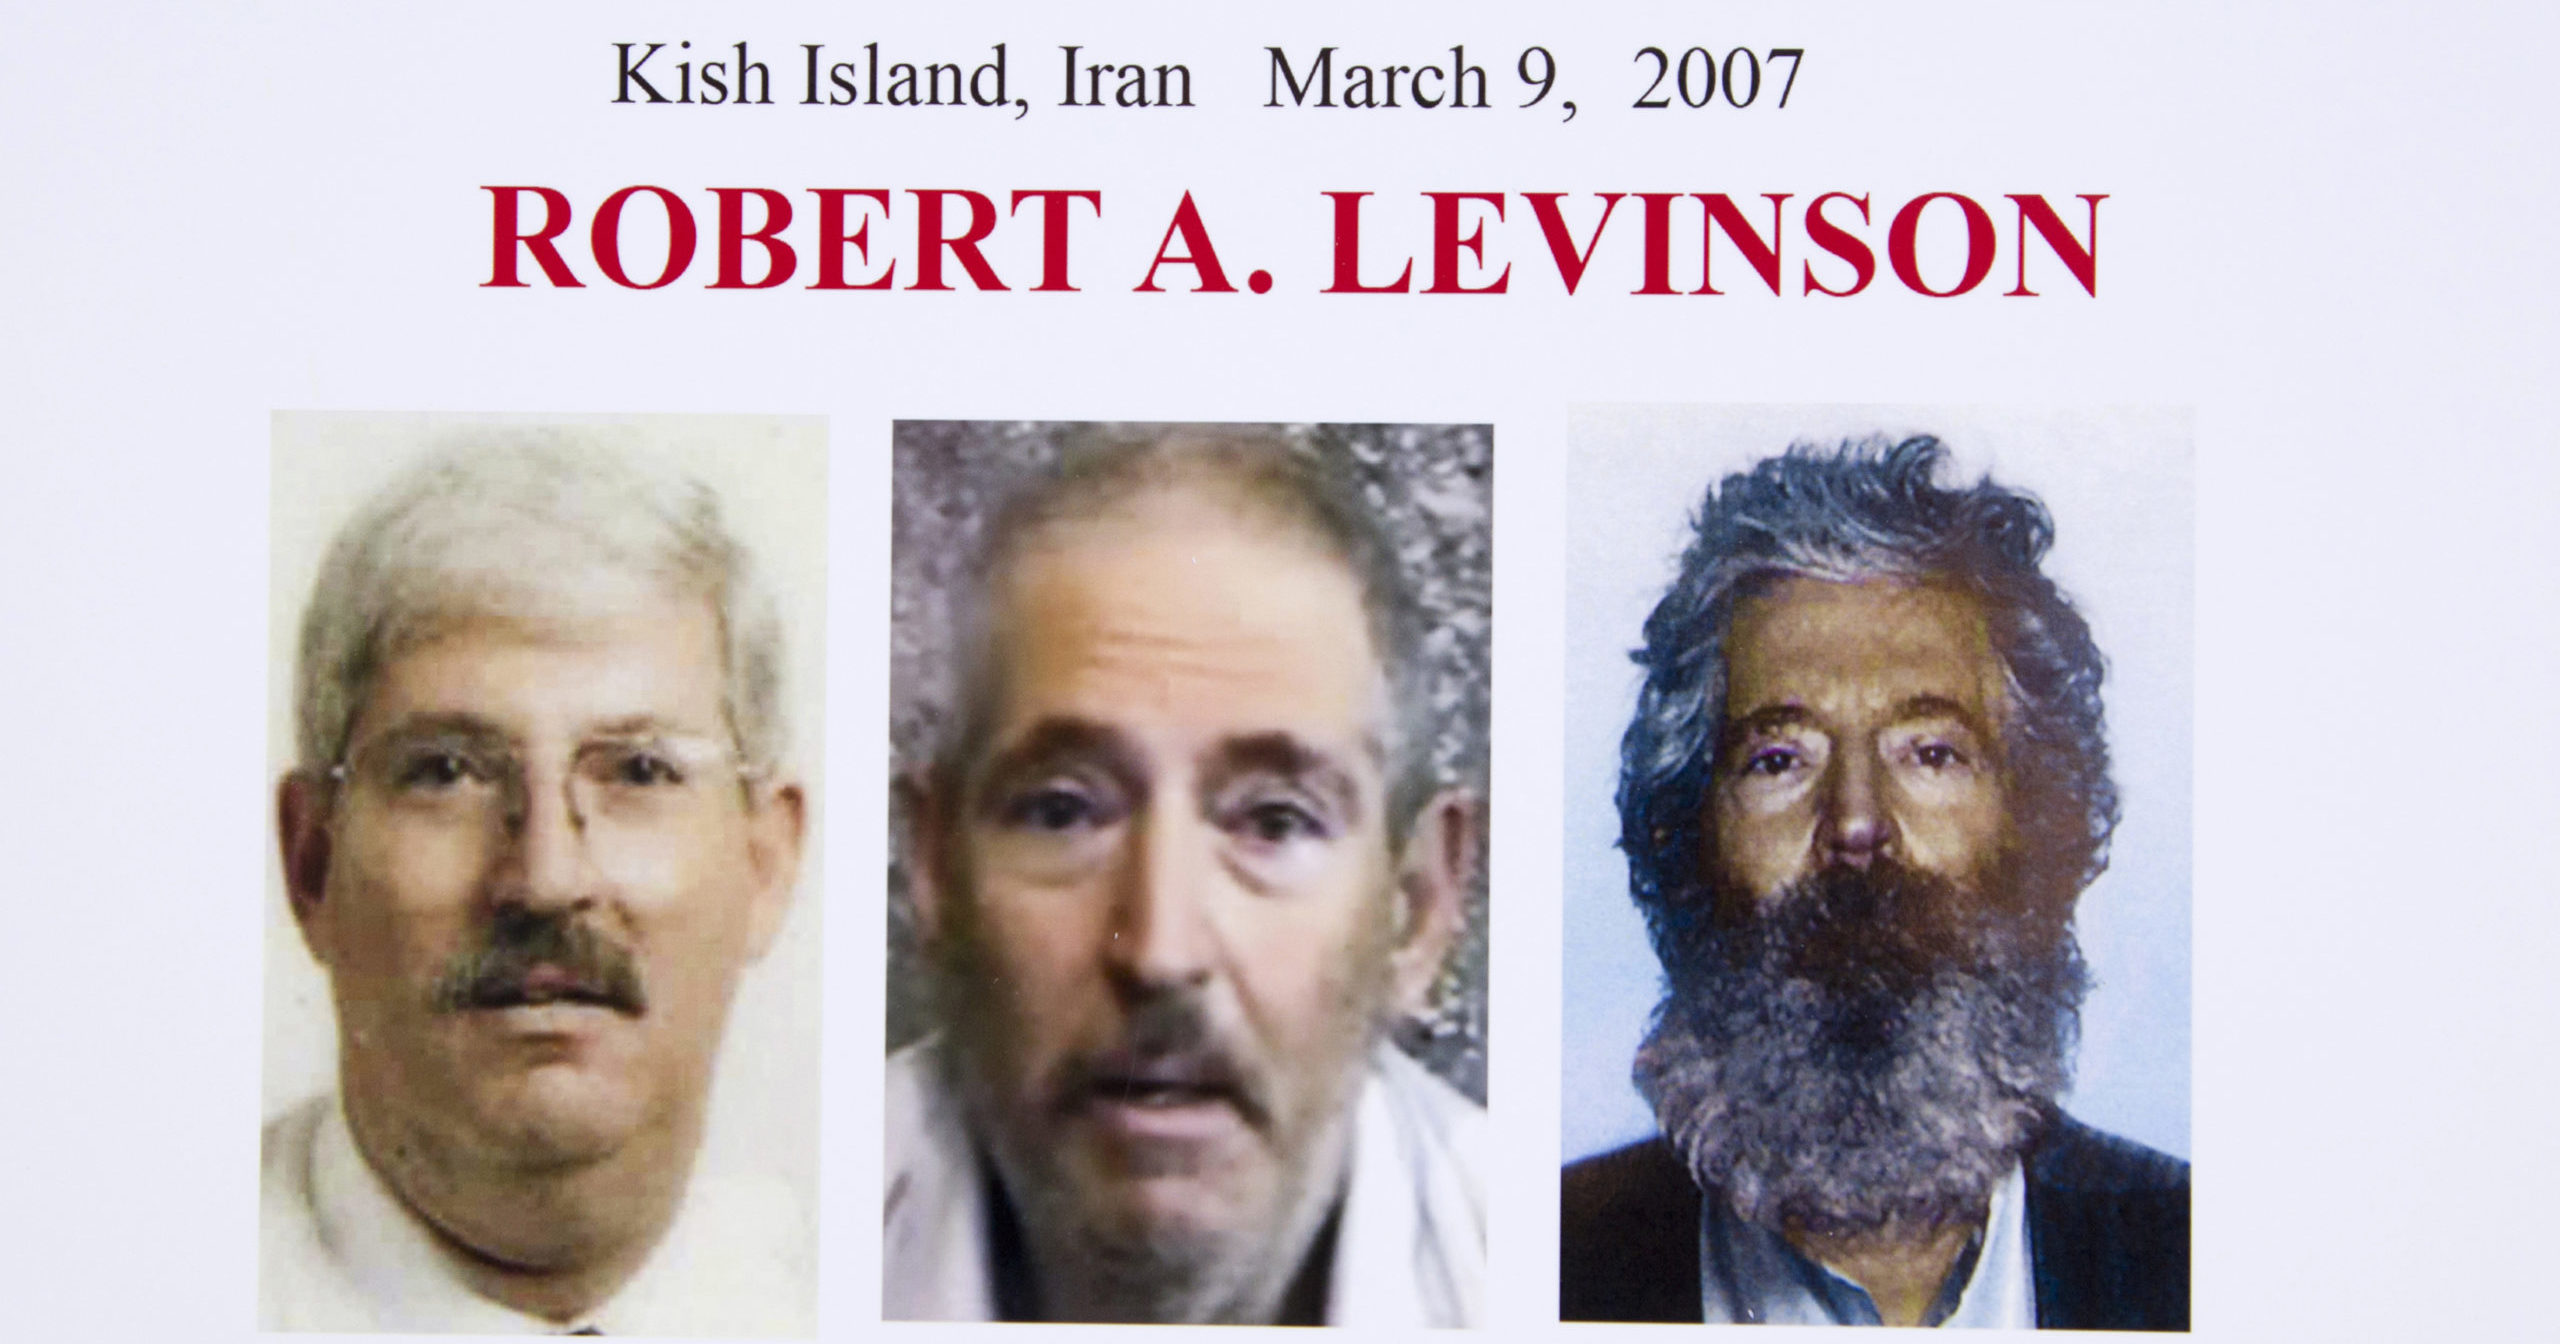 In this March 6, 2012, file photo, an FBI poster displays composite images of former FBI agent Robert Levinson. A US judge ordered Iran on Oct. 1, 2020, to pay $1.45 billion to the family of Levinson, who is believed to have been kidnapped by the Islamic Republic while on an unauthorized CIA mission to an Iranian island in 2007.